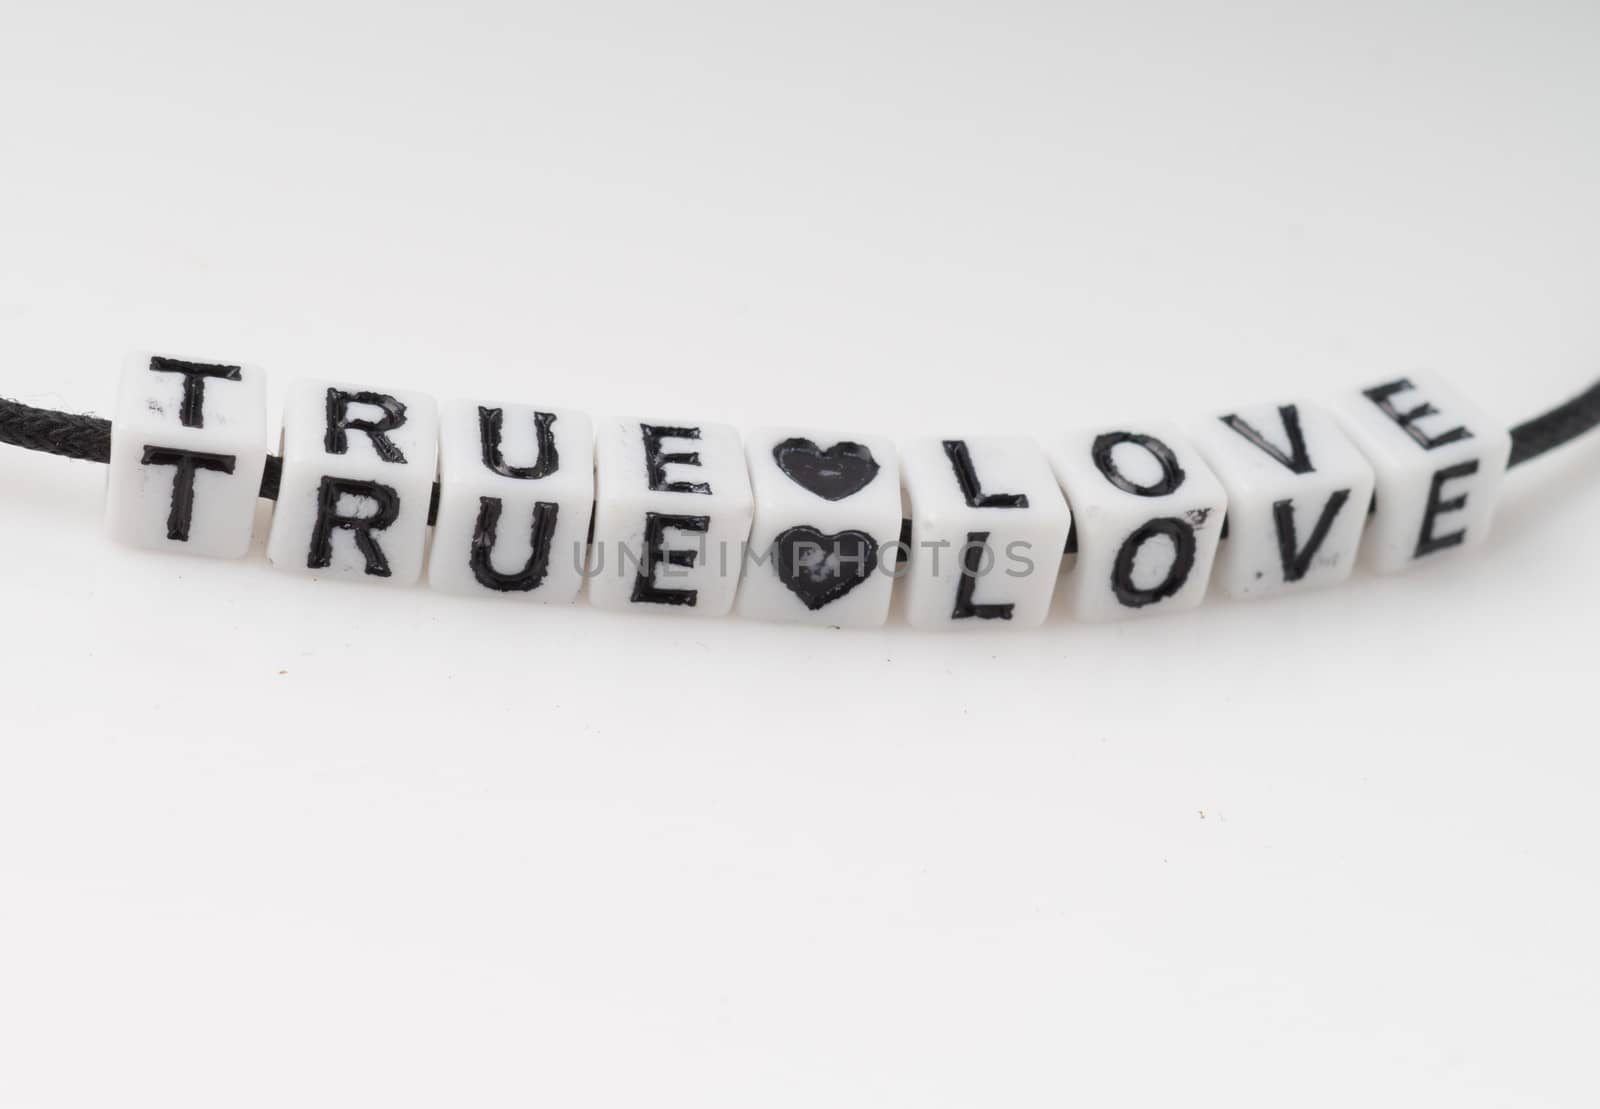 True love spelled in alphabed beads on white background